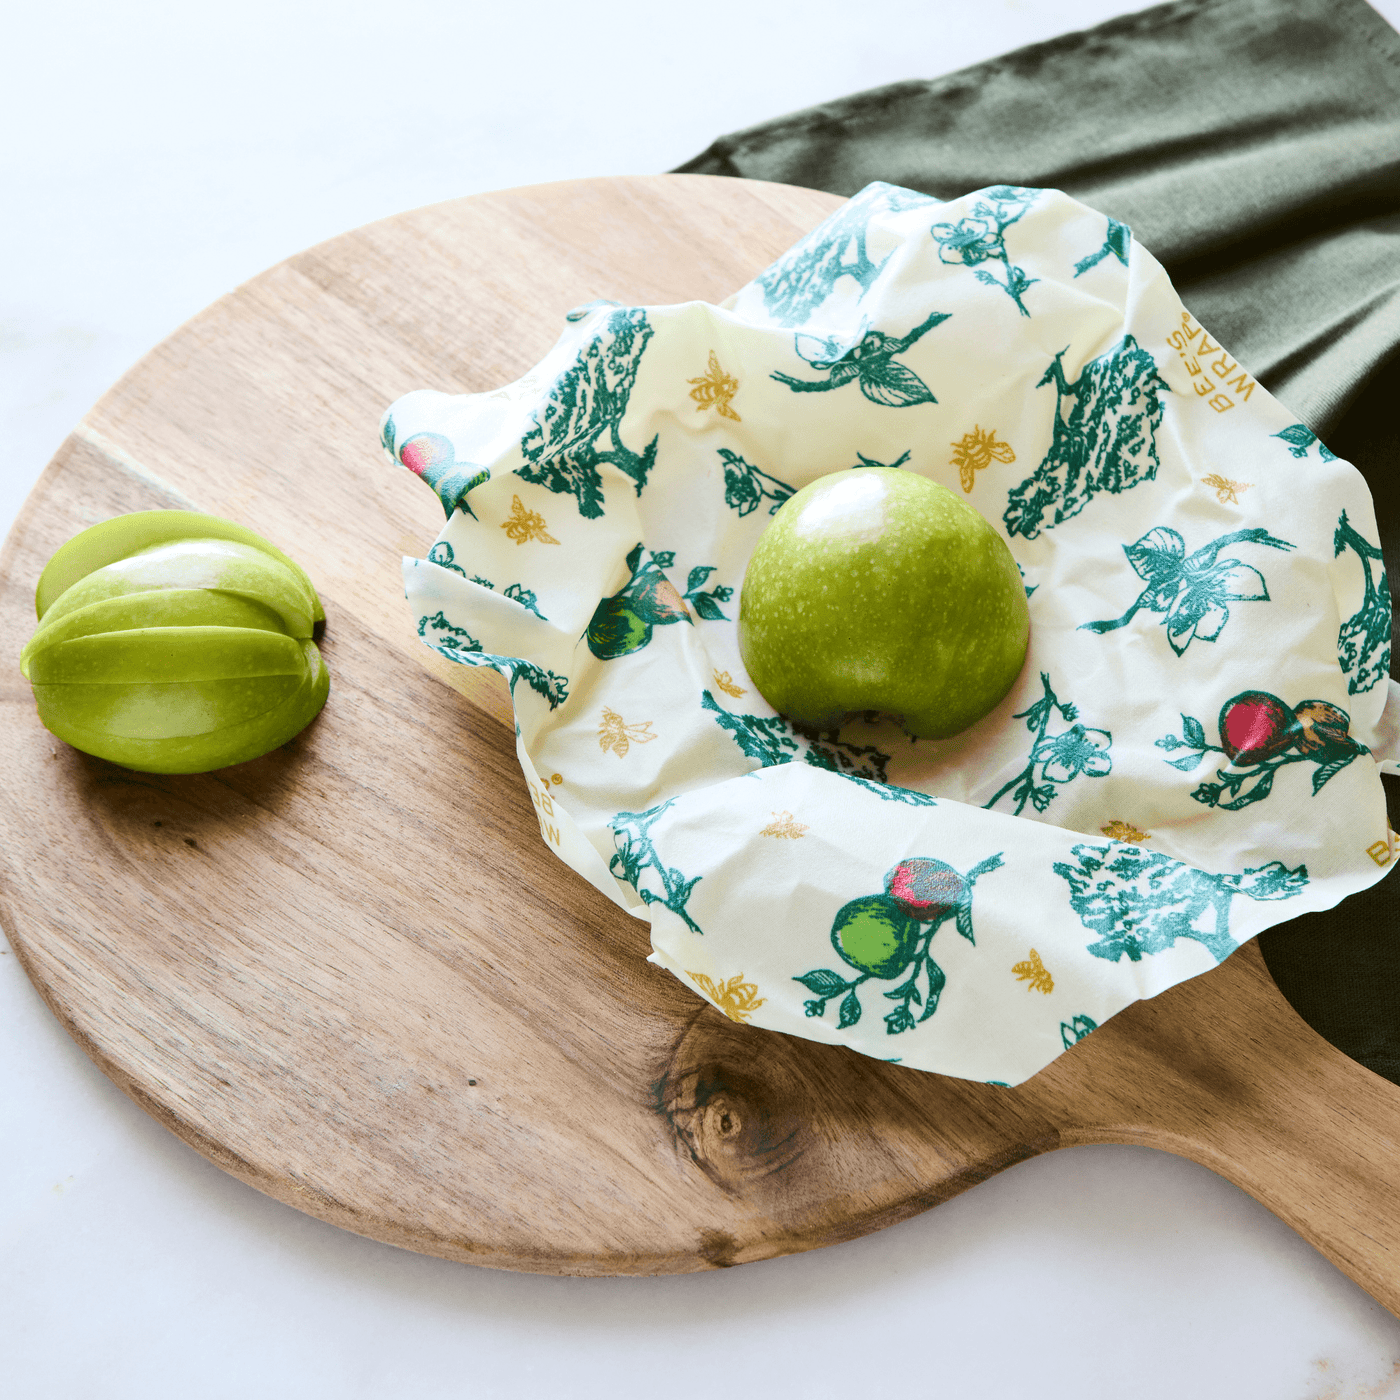 PUREVACY Reusable Beeswax Wrap Small, Medium, Large. 3 pack Teal Beeswax  Wraps for Food Storage. Natural Cotton and Bees Wax Wraps Reusable.